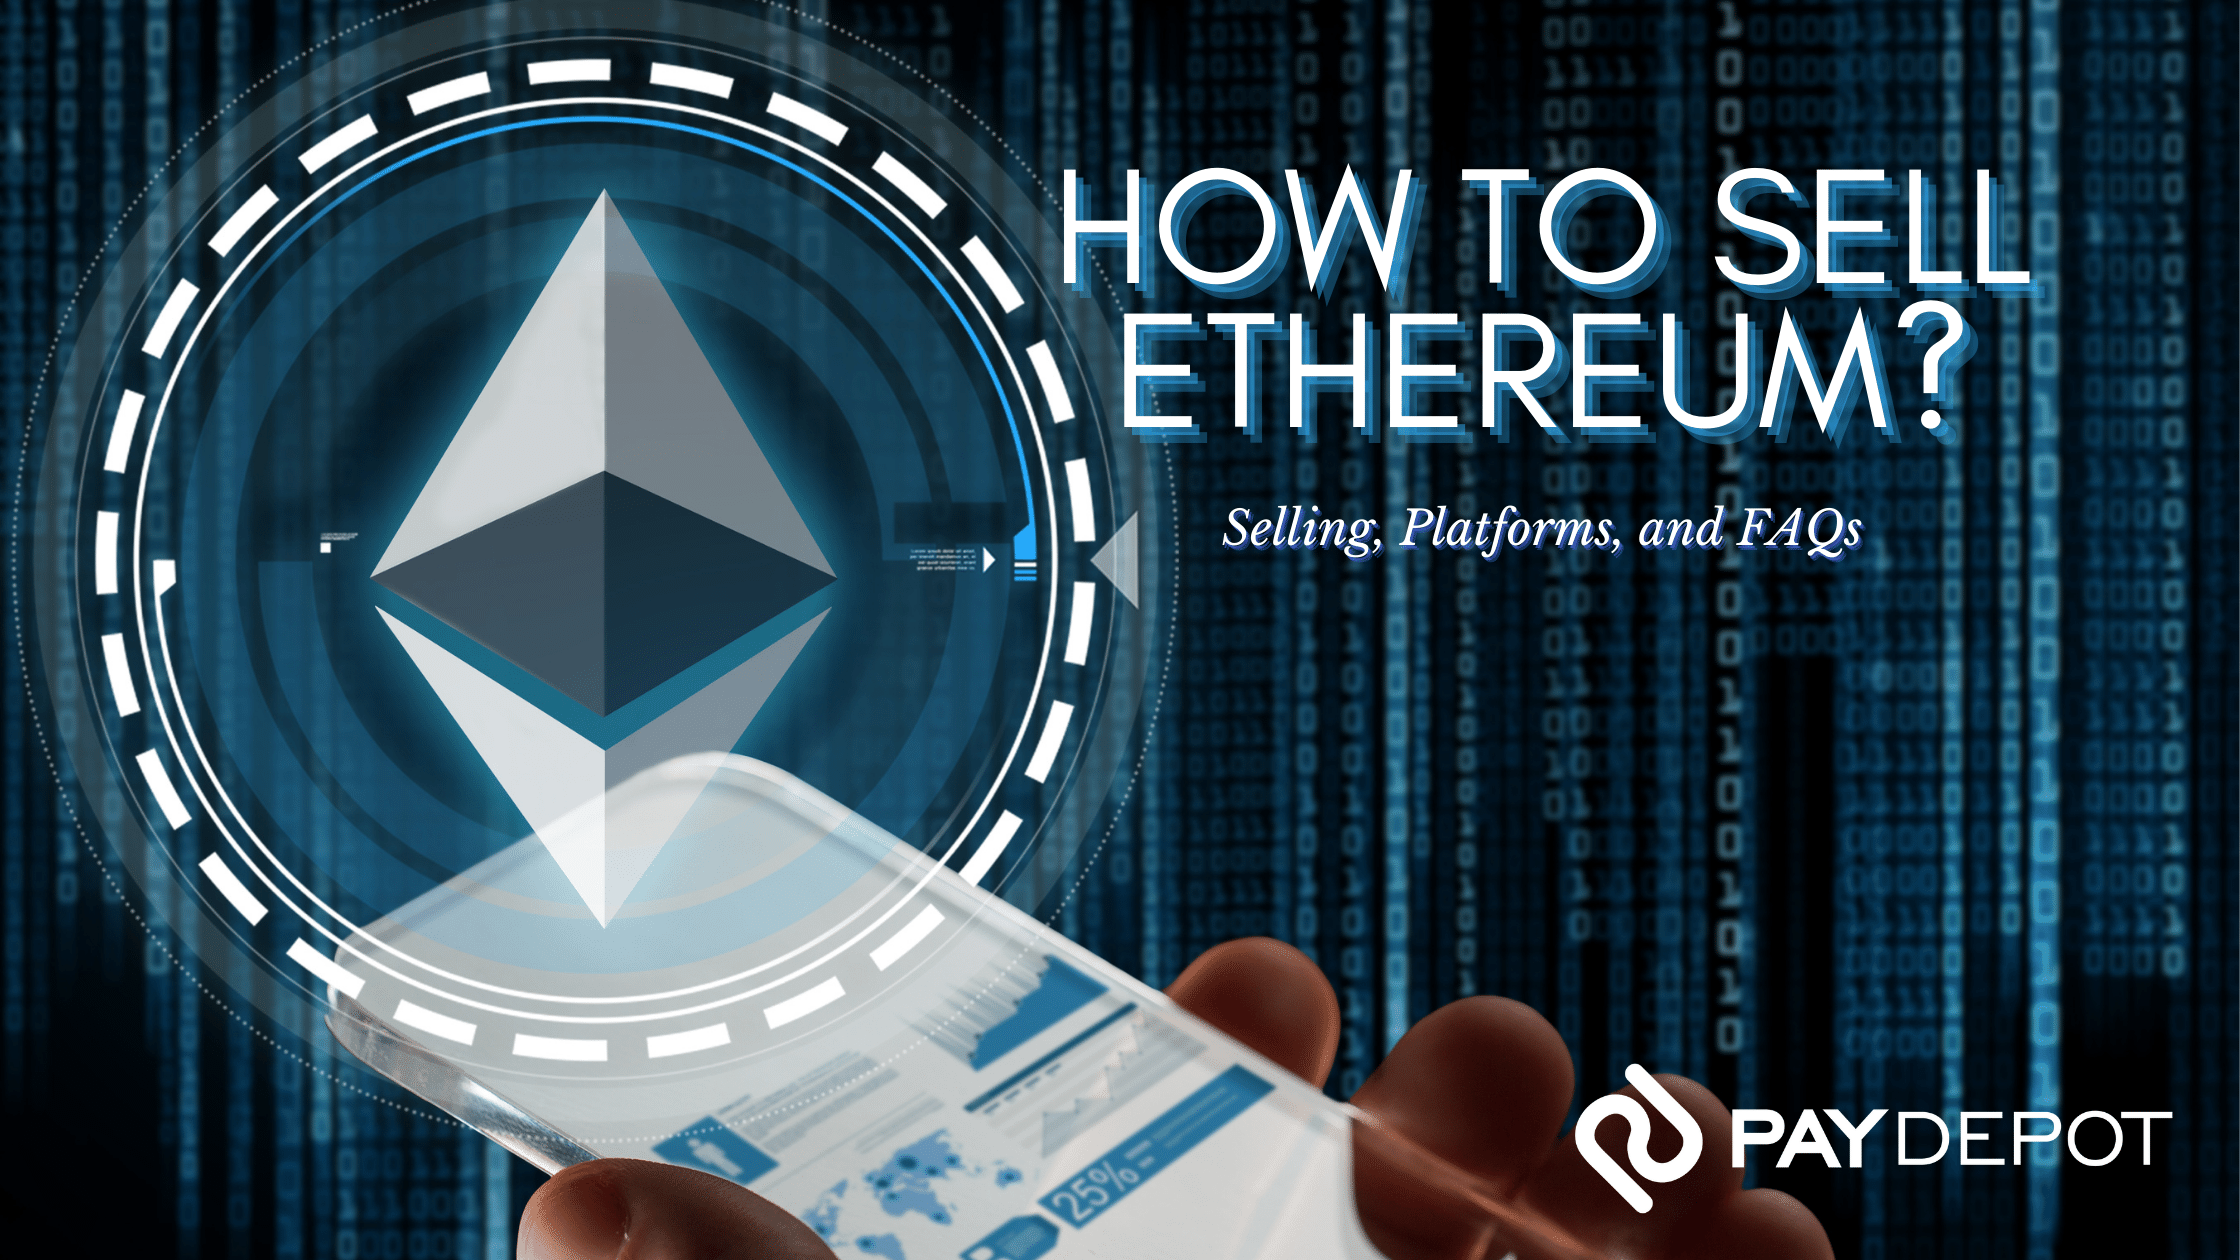 How To Sell Ethereum: 5 Ways To Sell ETH for Cash In 